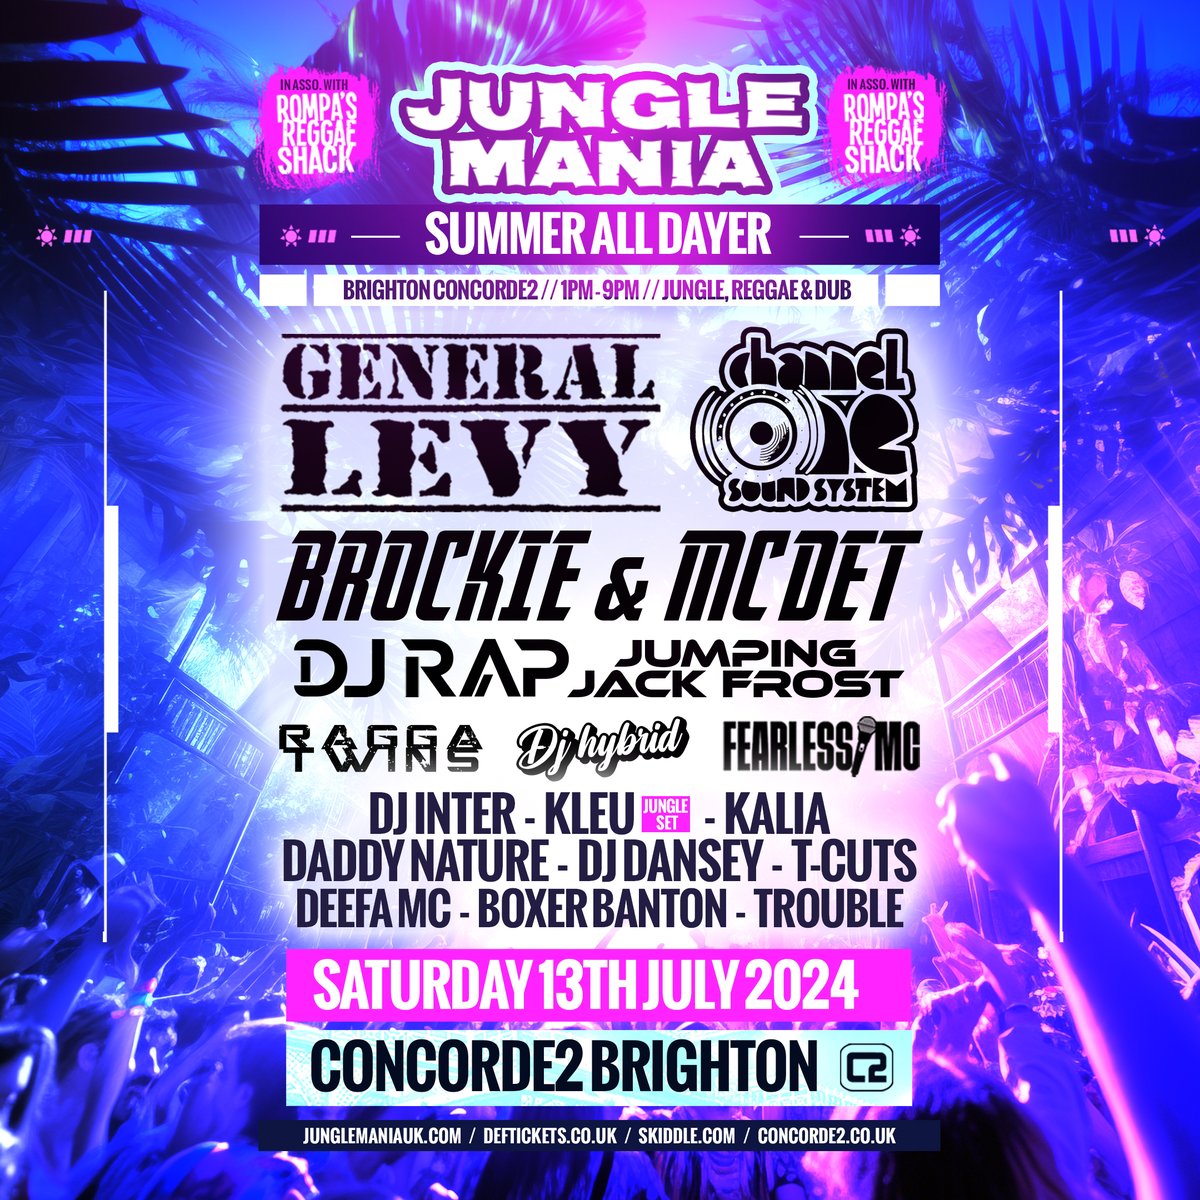 ☀☀ Line Up Announcement ☀☀ Jungle Mania UK link up with Rompa's Reggae Shack for an 'All Dayer' of Jungle, DNB, Reggae and Dub on Brighton Seafront! Grab your tickets from concorde2.co.uk